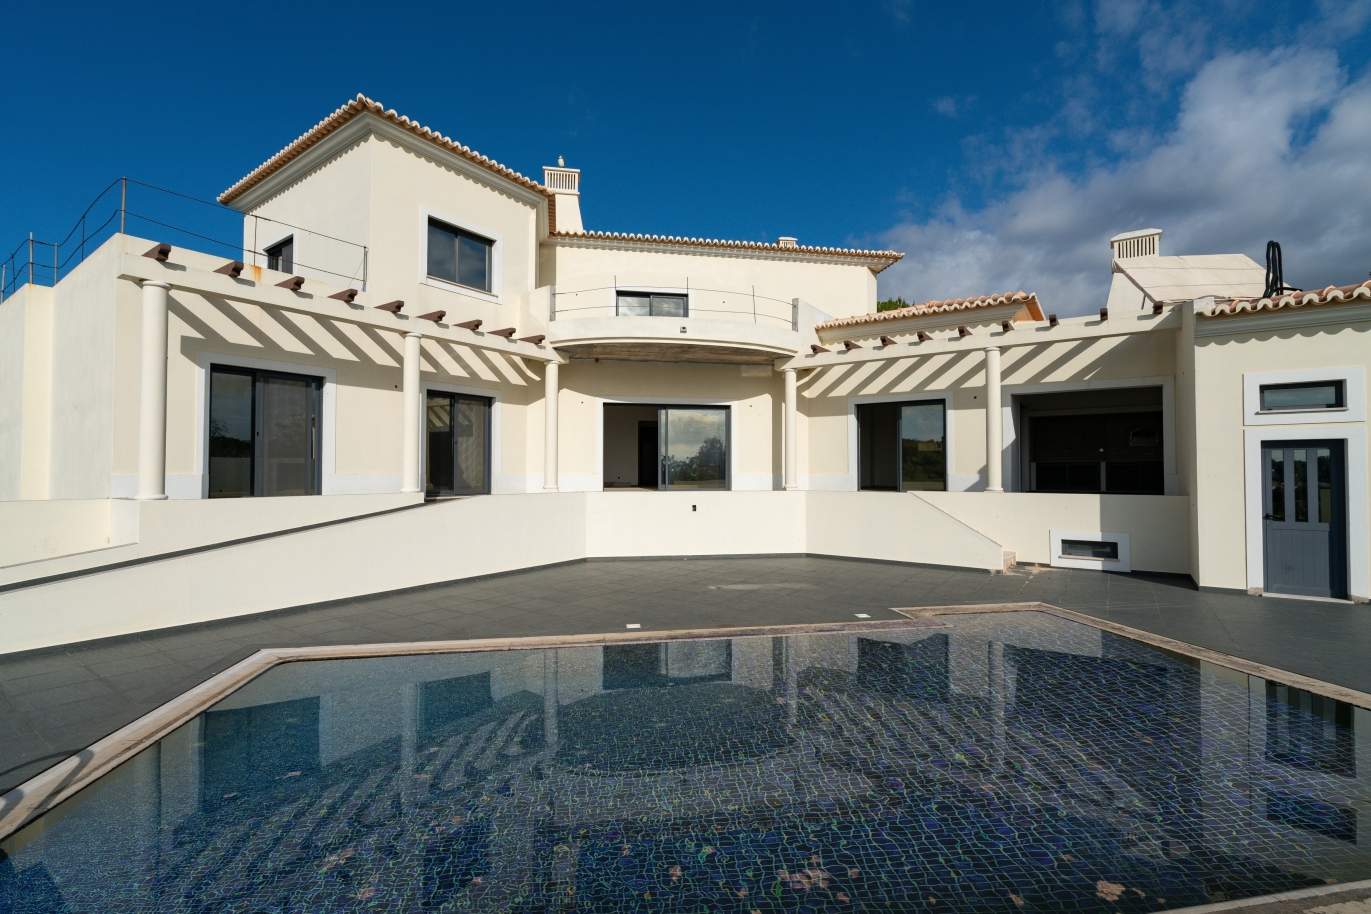 4 bedrooms Villa, under construction, with mountain and sea view, near Boliqueime, Algarve_157015